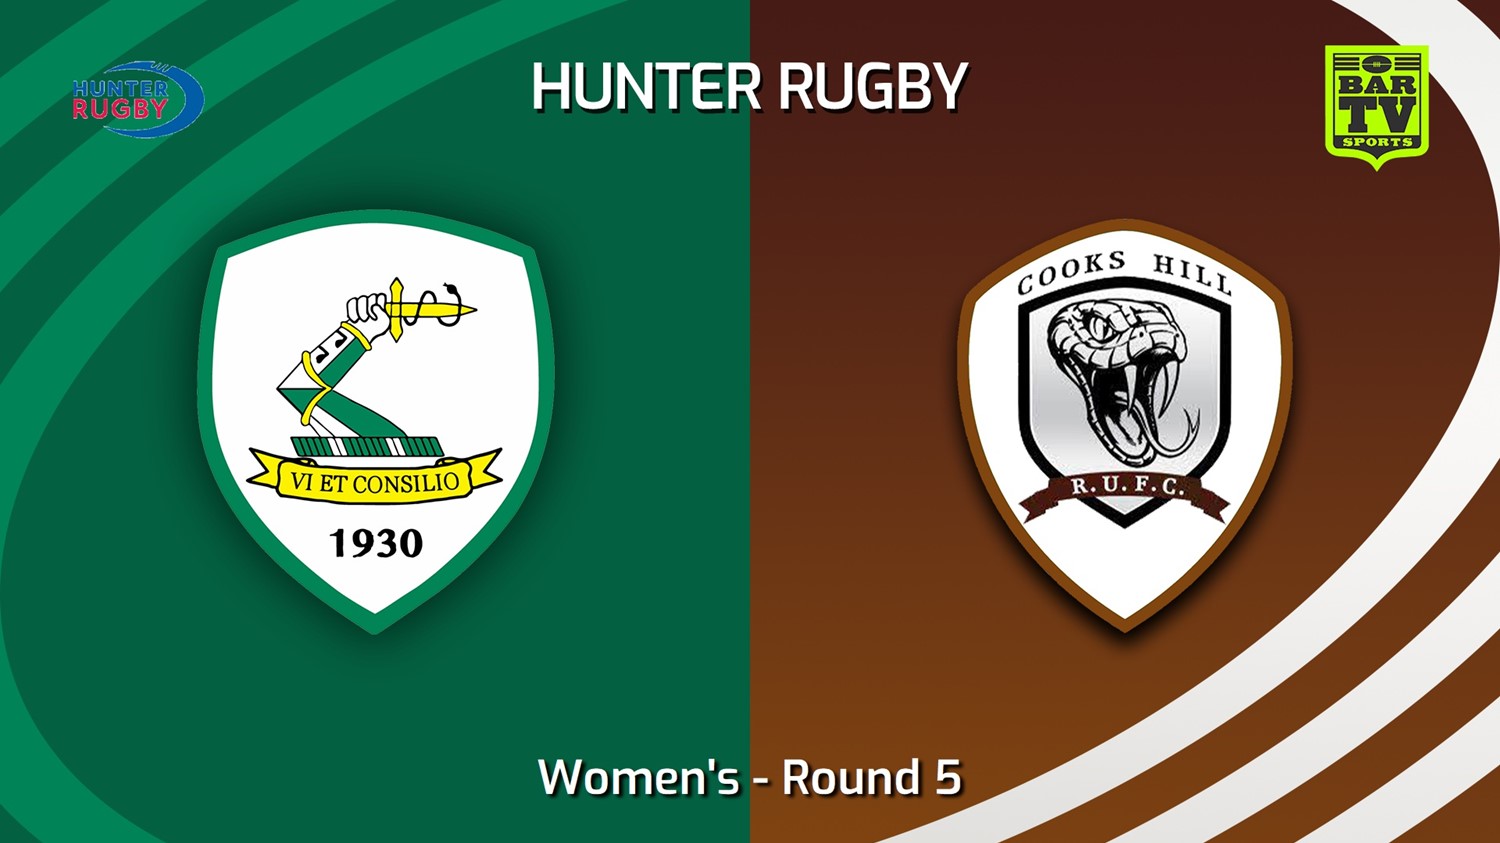 240605-video-Hunter Rugby Round 5 - Women's - Merewether Carlton v Cooks Hill Brownies Slate Image